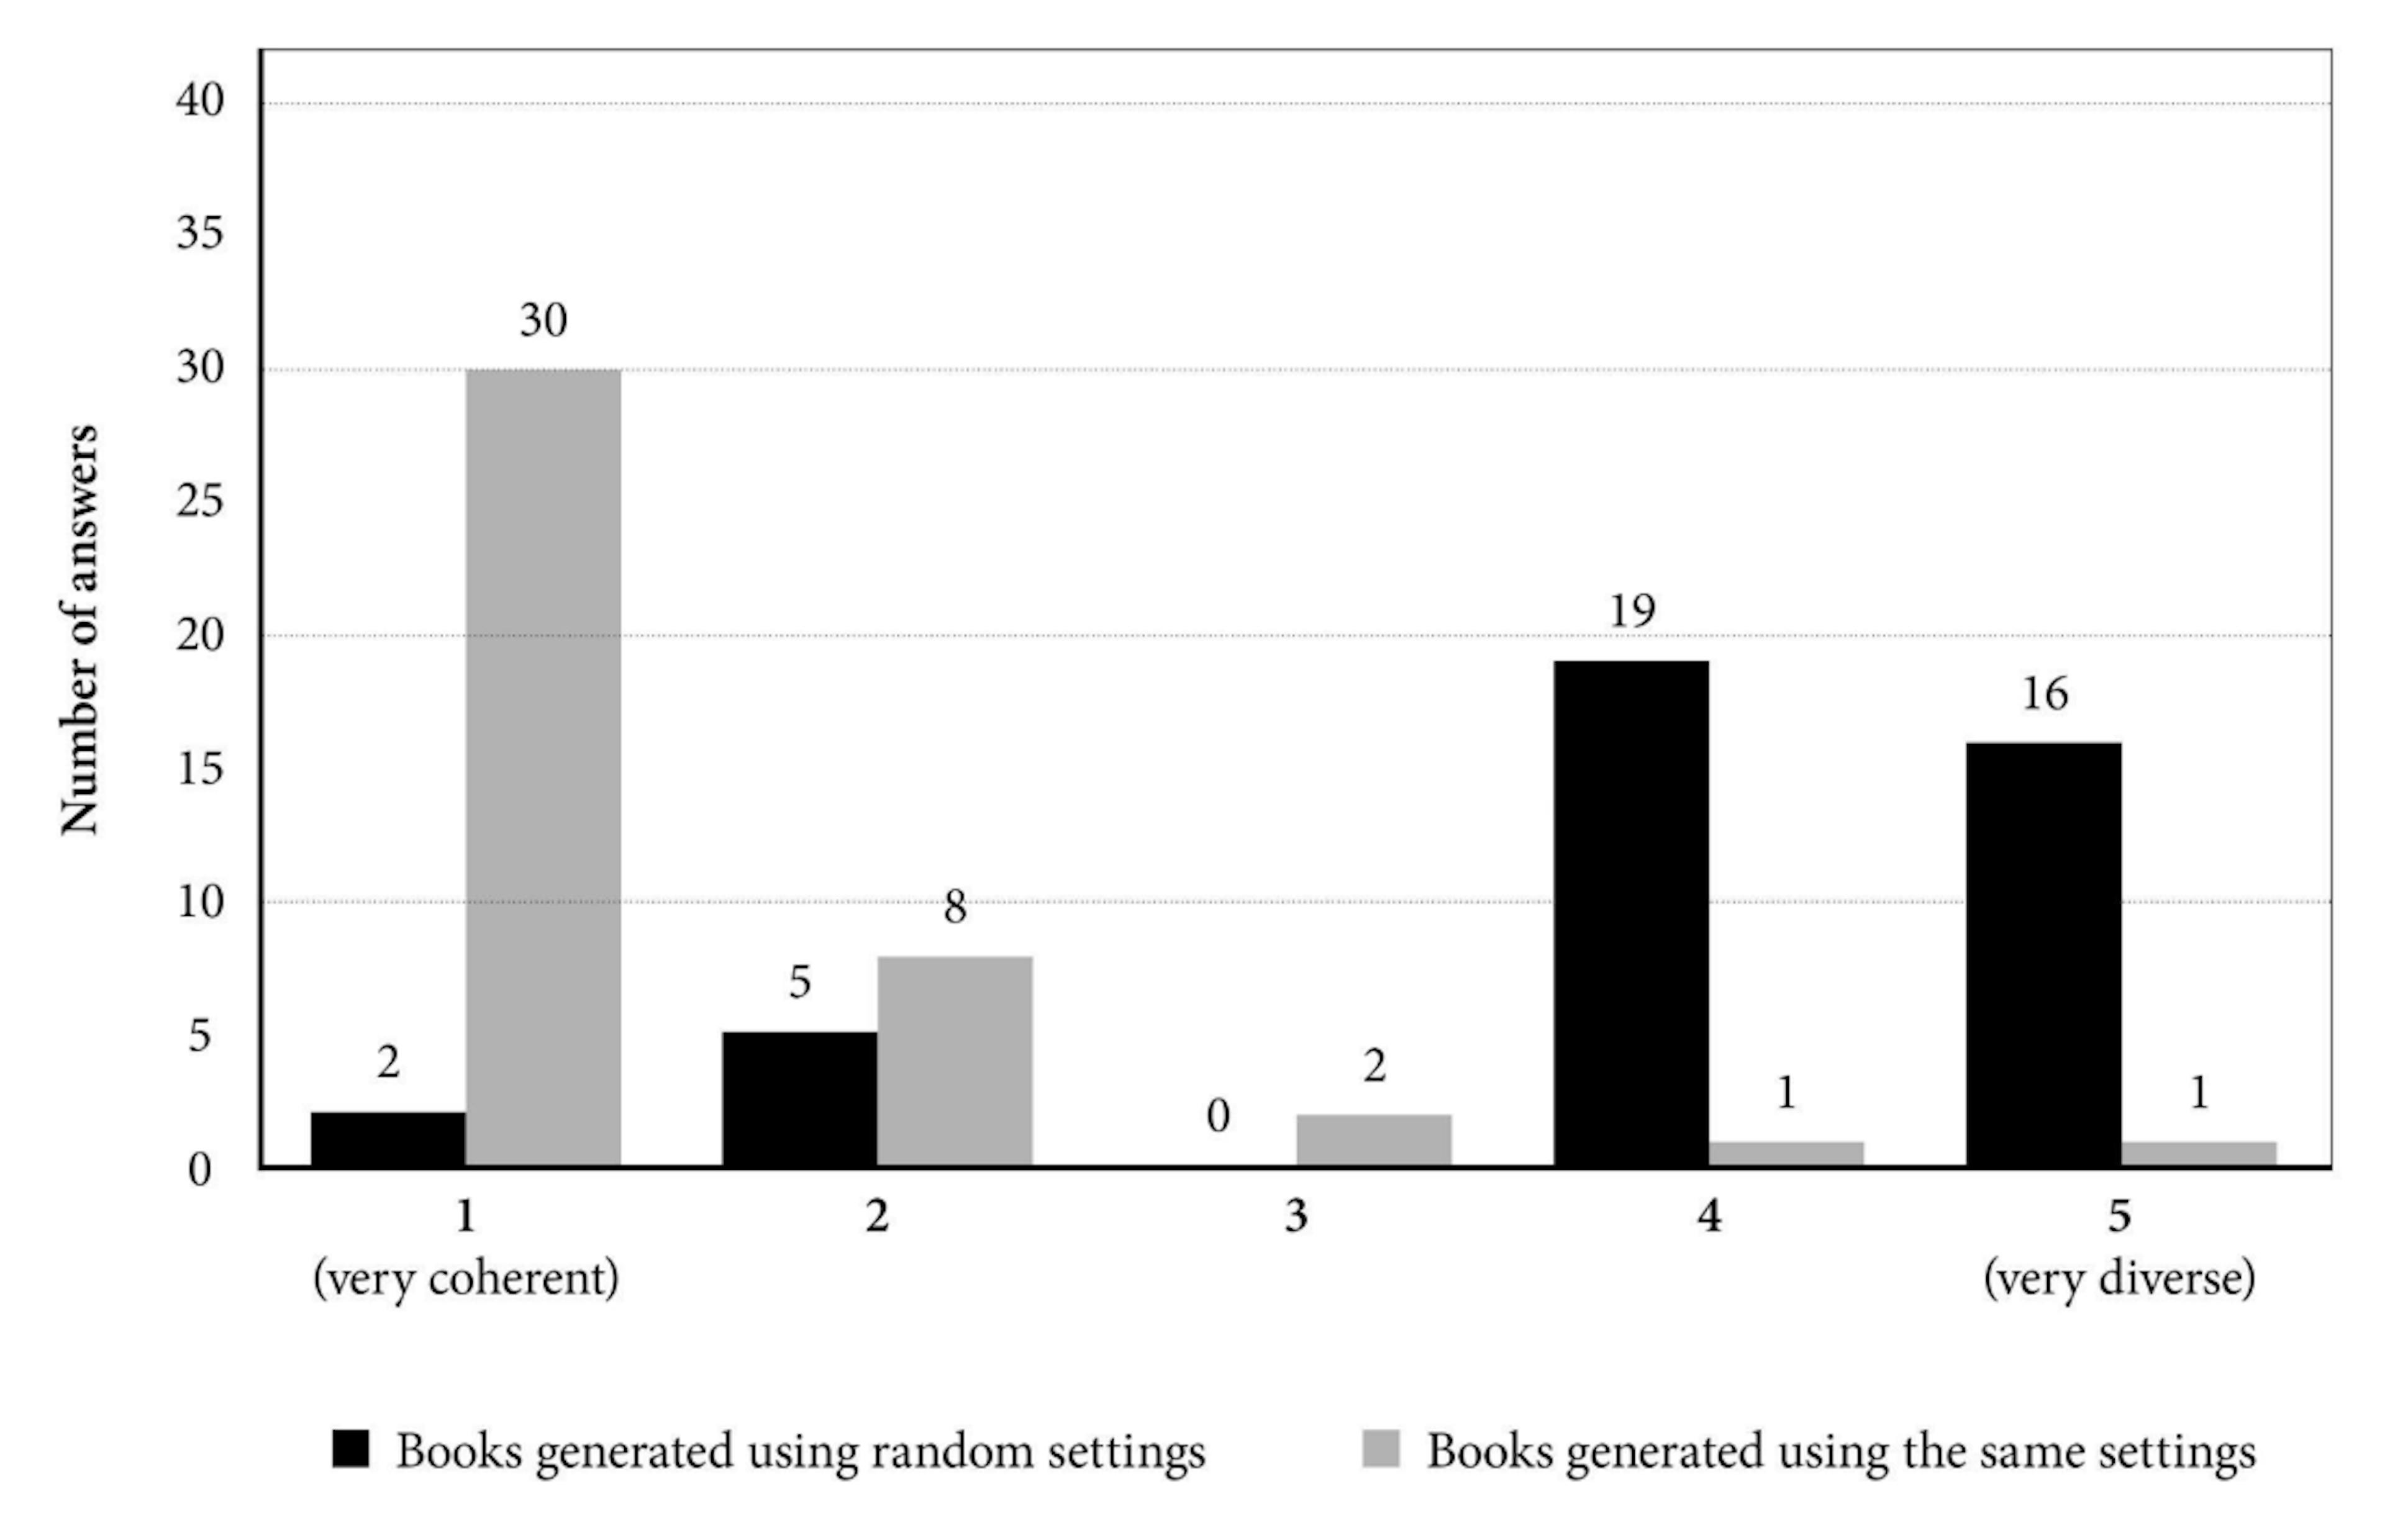 Figure 5. Distribution of the answers obtained in the user survey conducted to evaluate the visual coherency and diversity of different books generated by the system. Black bars regard user evaluations of books created using random settings chosen automatically by the system. Grey bars regard user evaluations of books created using the same settings imported from a selected settings file.